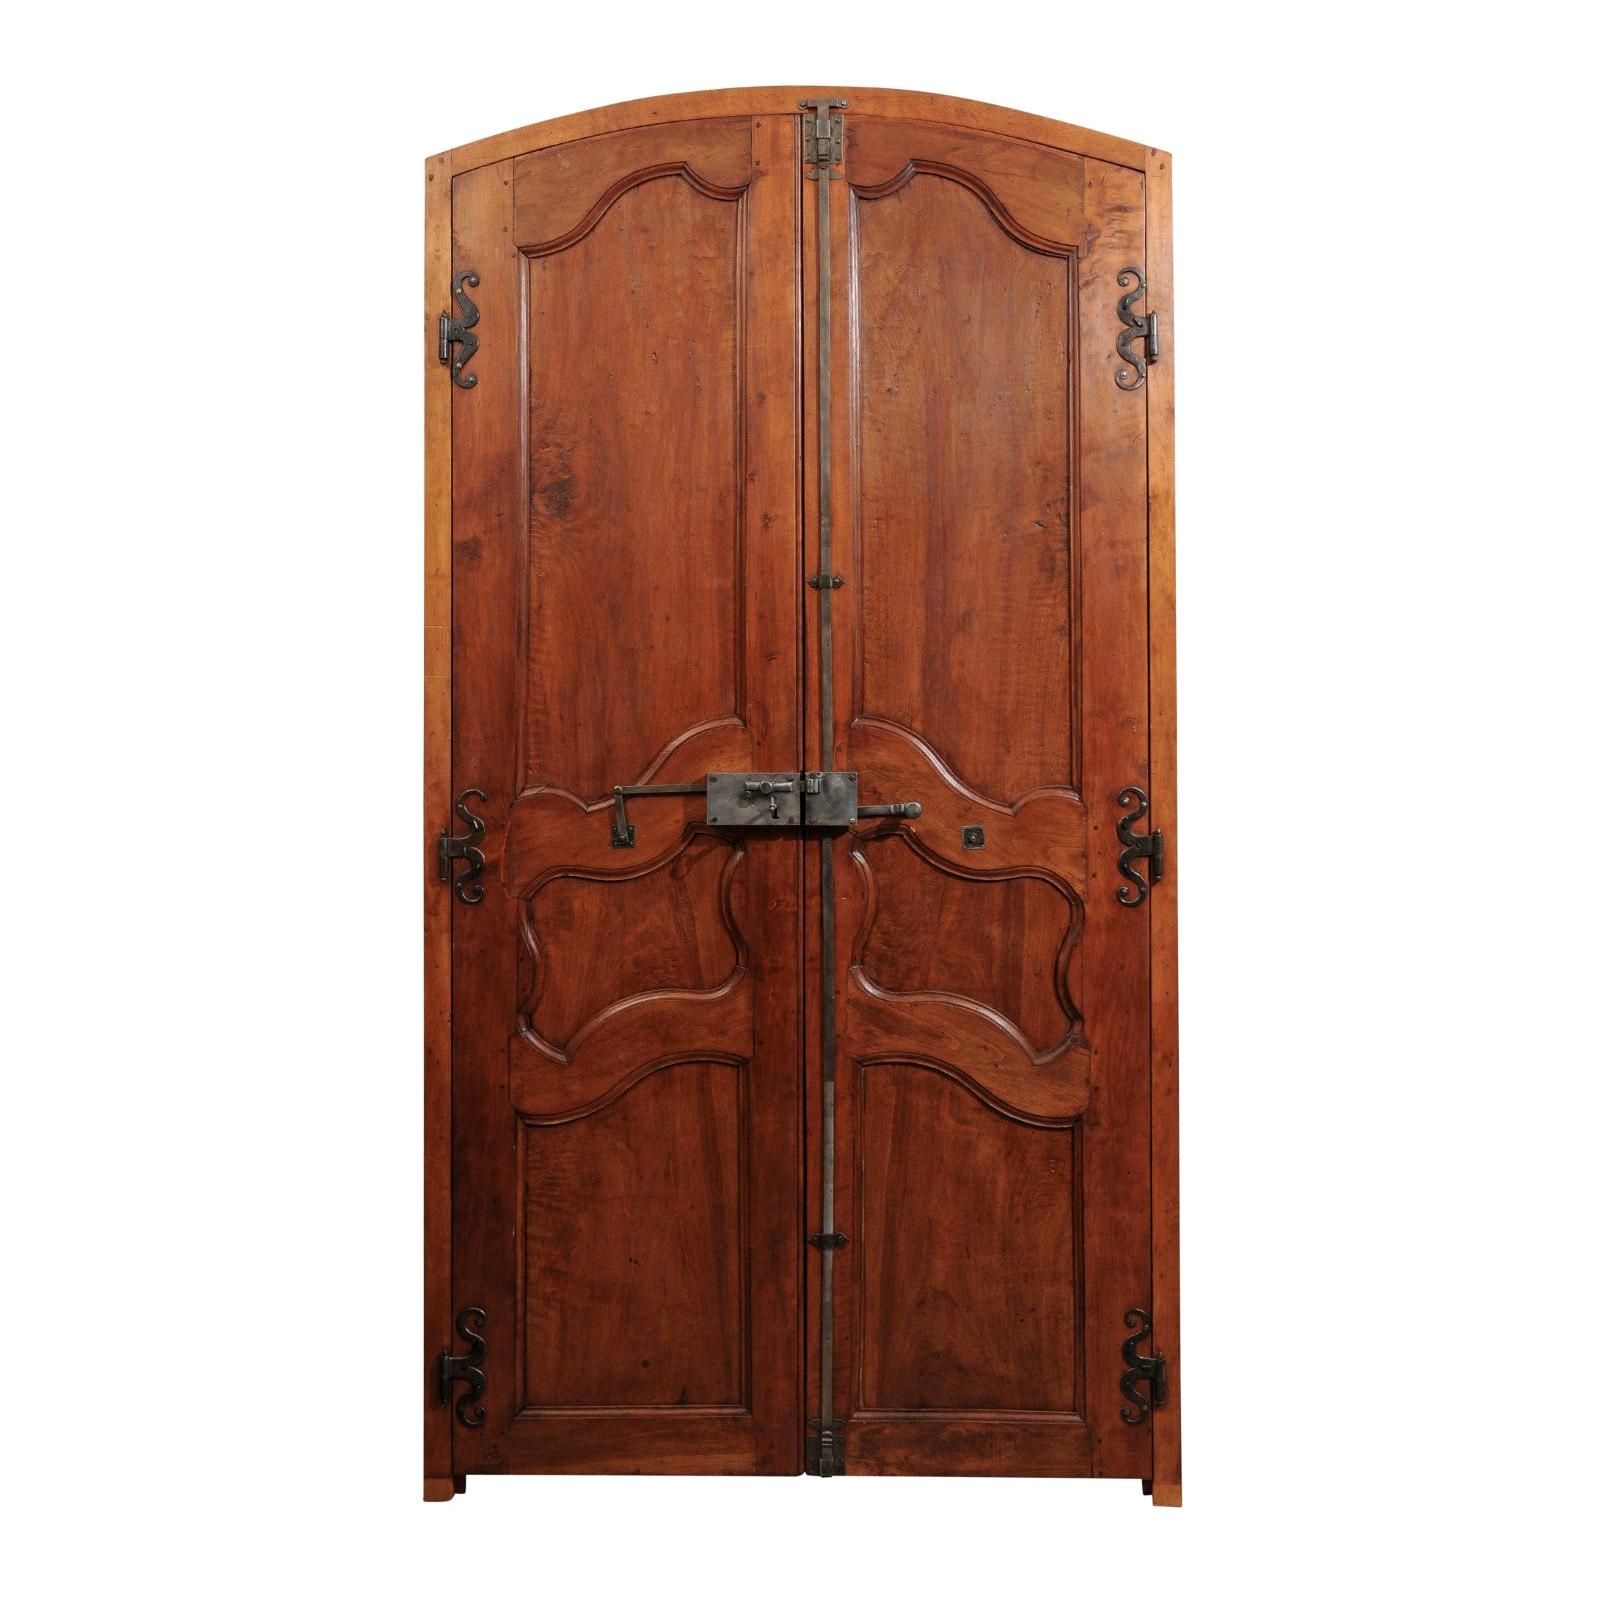 Pair of French Louis XV Style 19th Century Doors in Alder Wood with Custom Frame